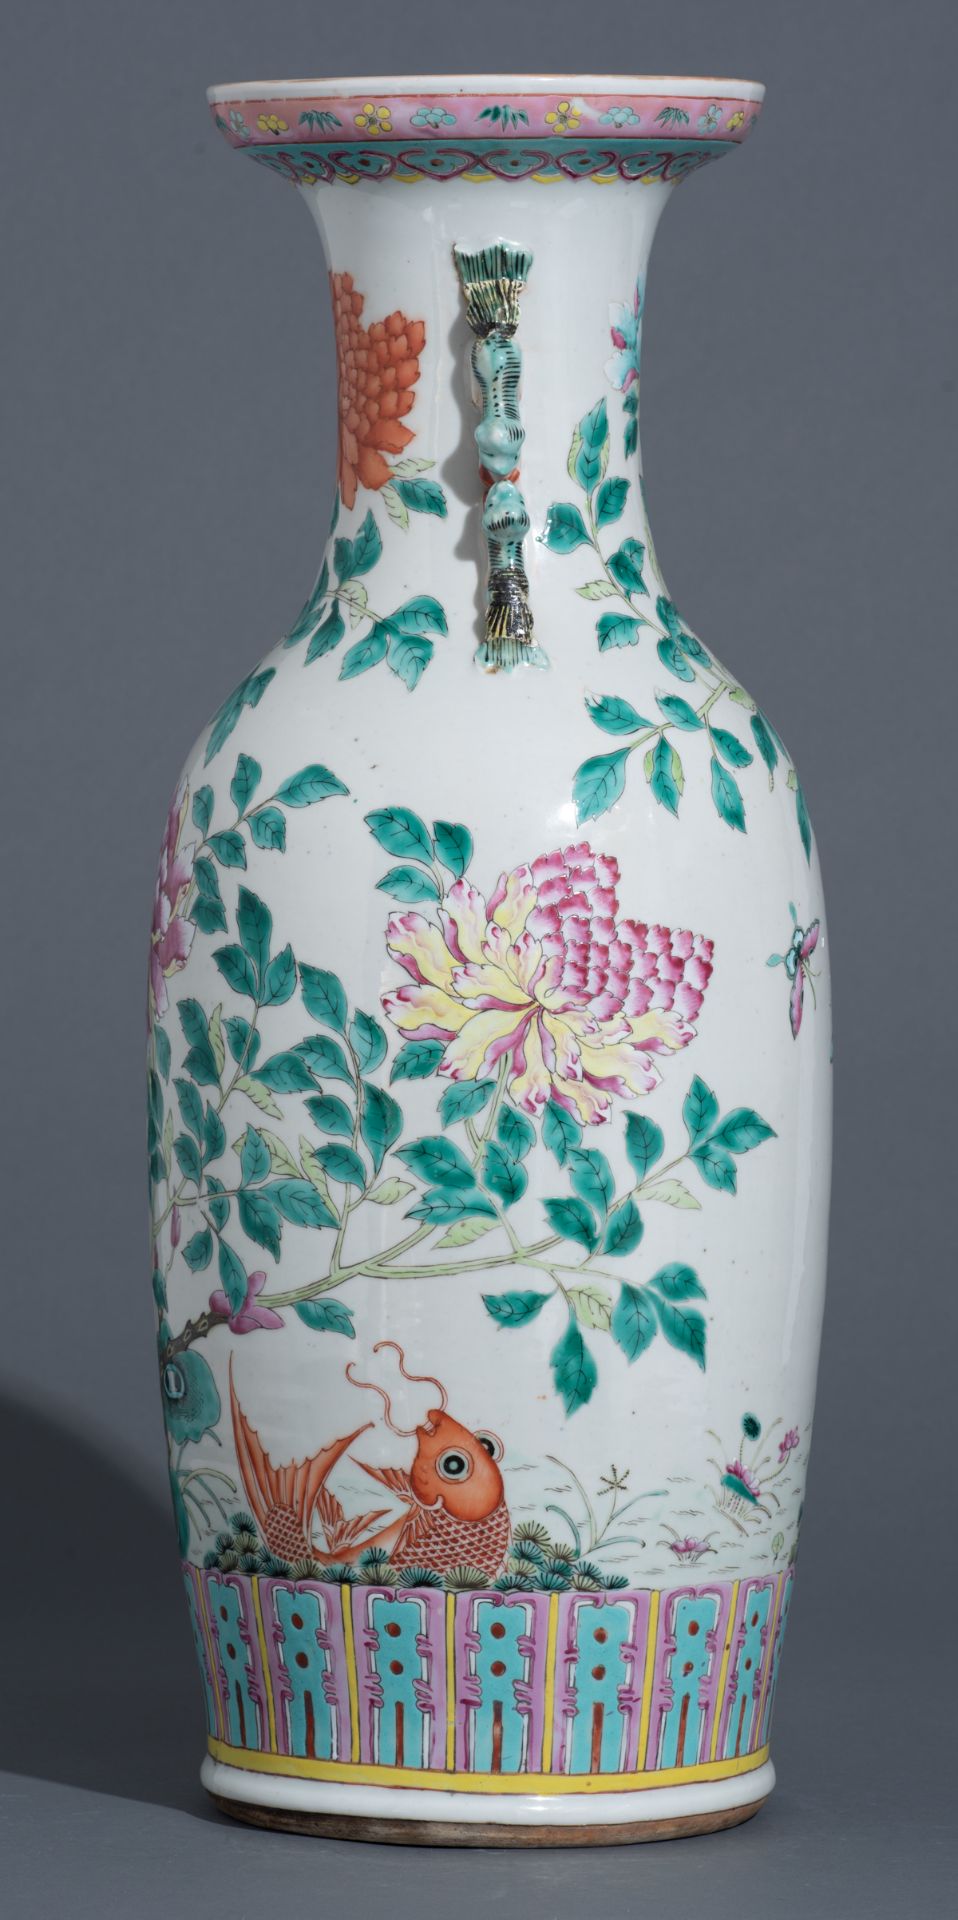 A Chinese famille rose vase, overall decorated with flowers, butterflies and carps, 19thC, H 61 cm - Image 3 of 7